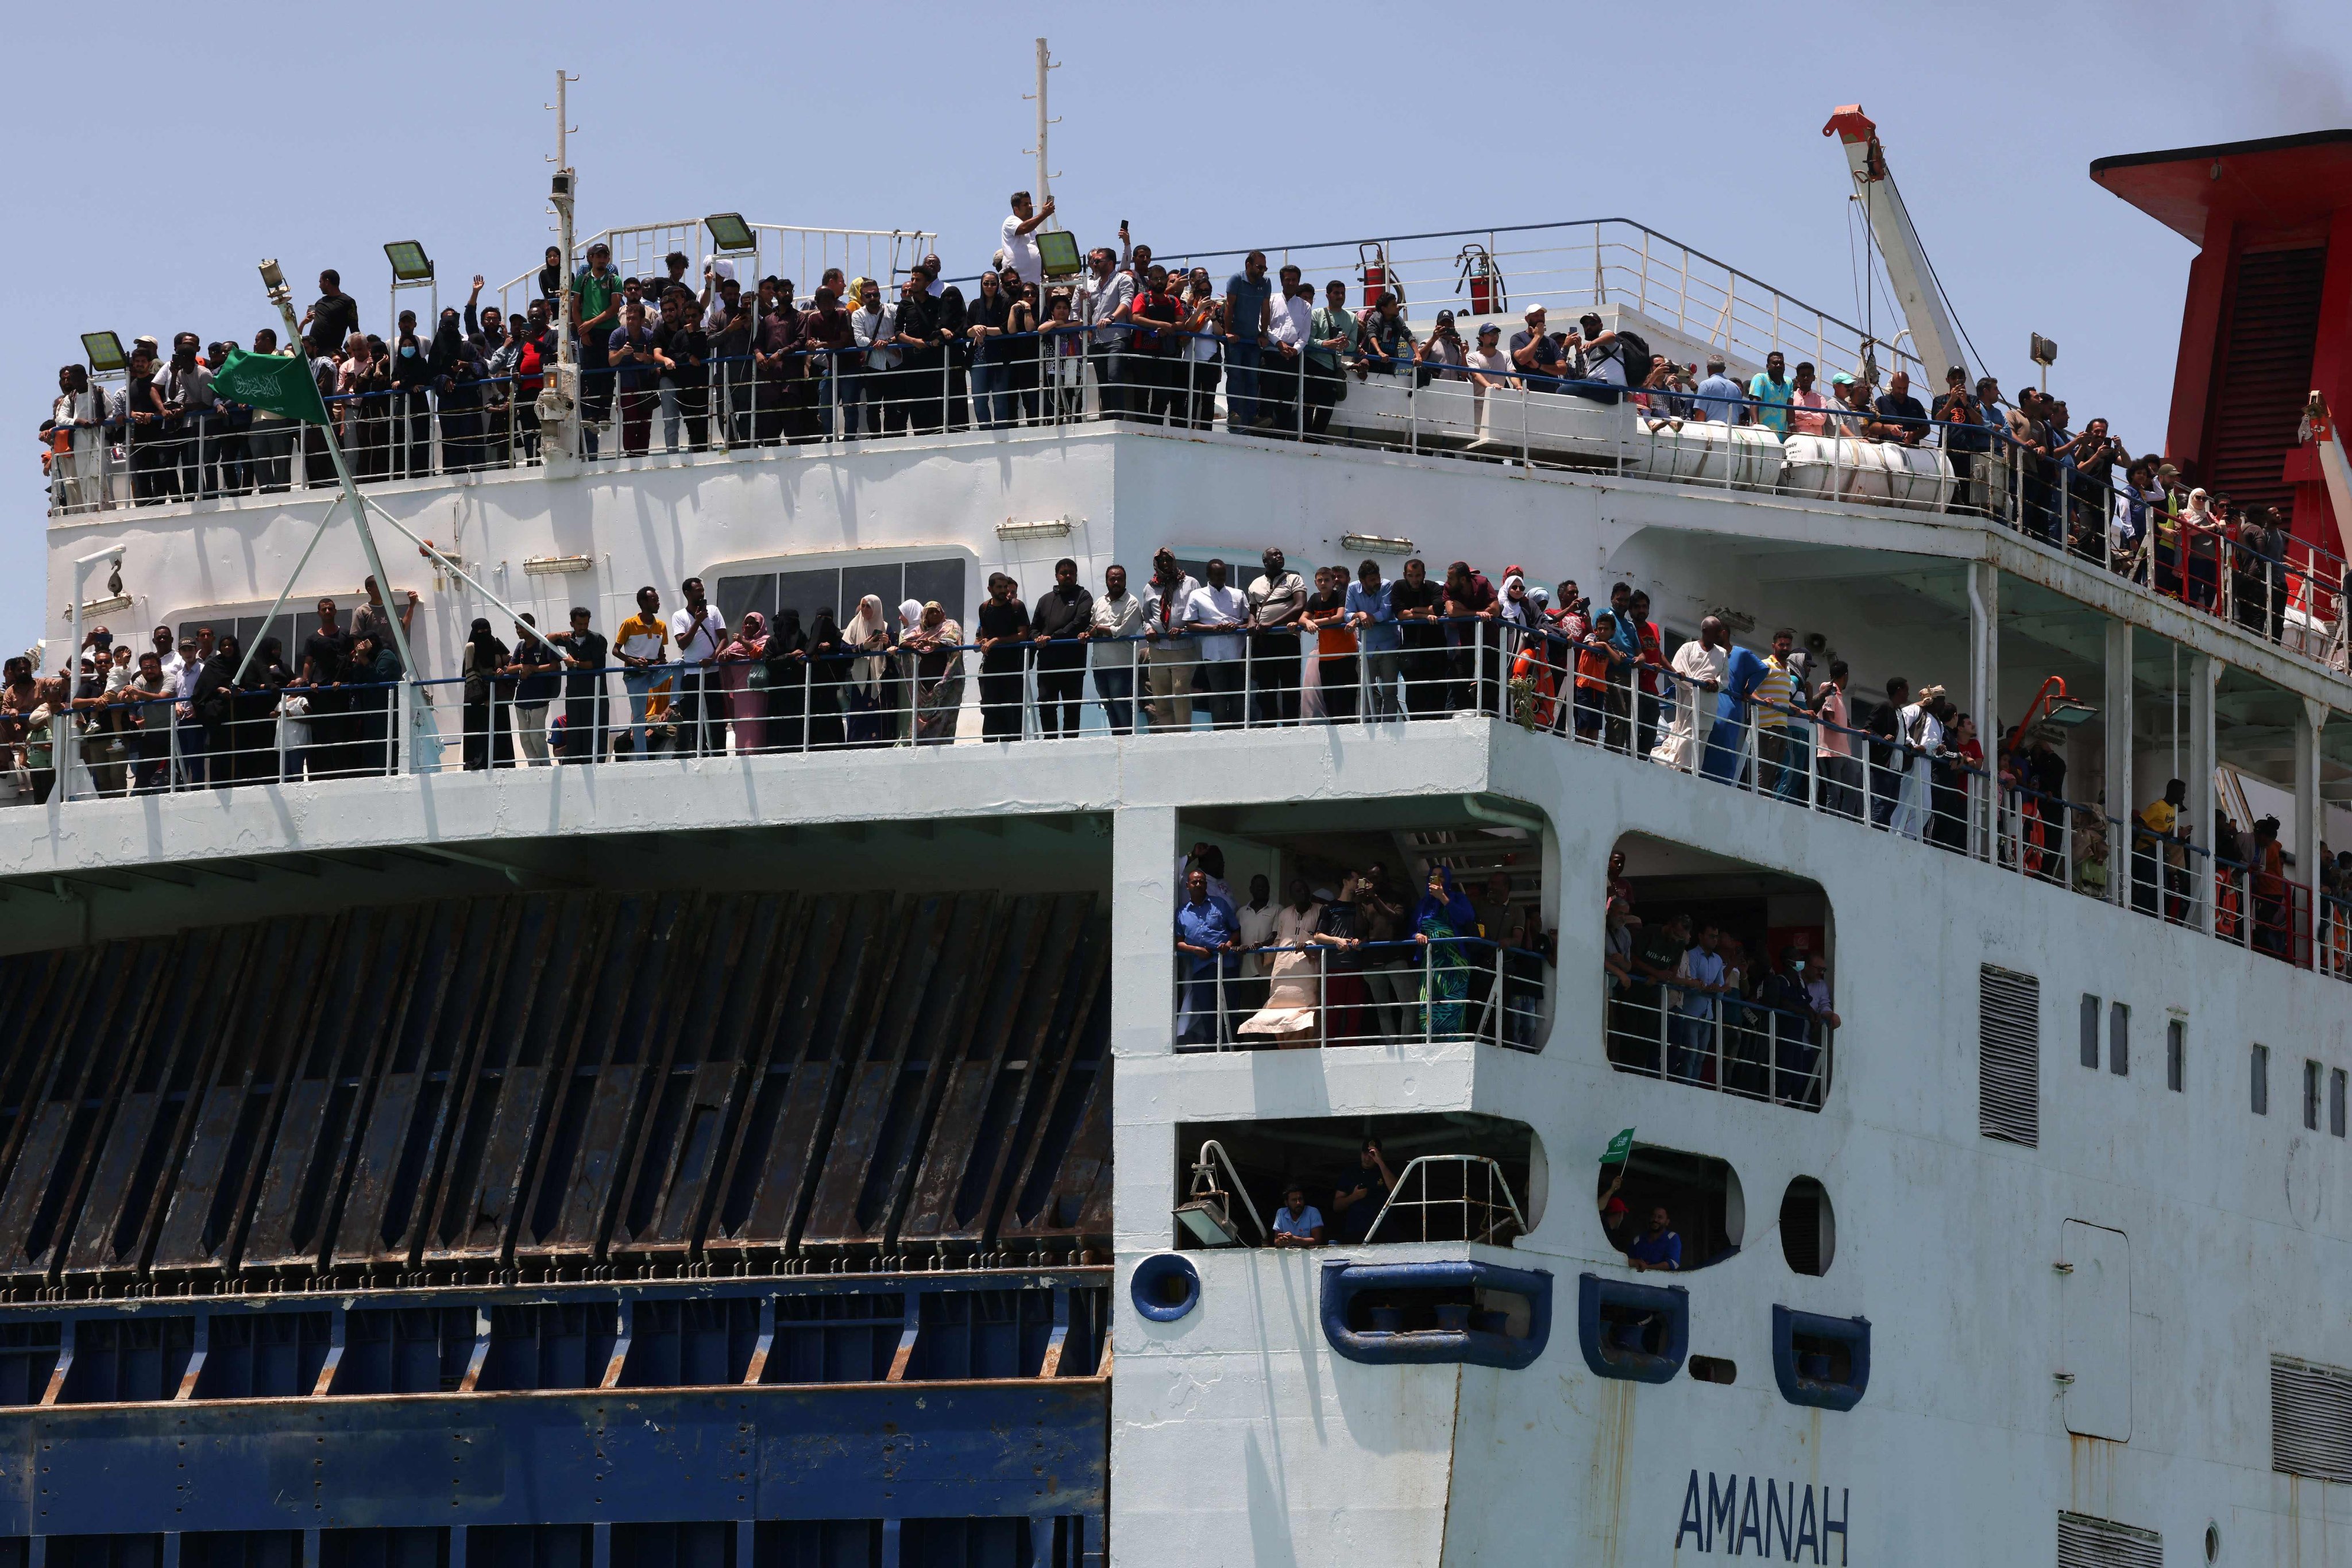 Evacuees stand on a ferry as it transports some 1,900 people across the Red Sea from Port Sudan to the Saudi King Faisal navy base in Jeddah. Photo: AFP